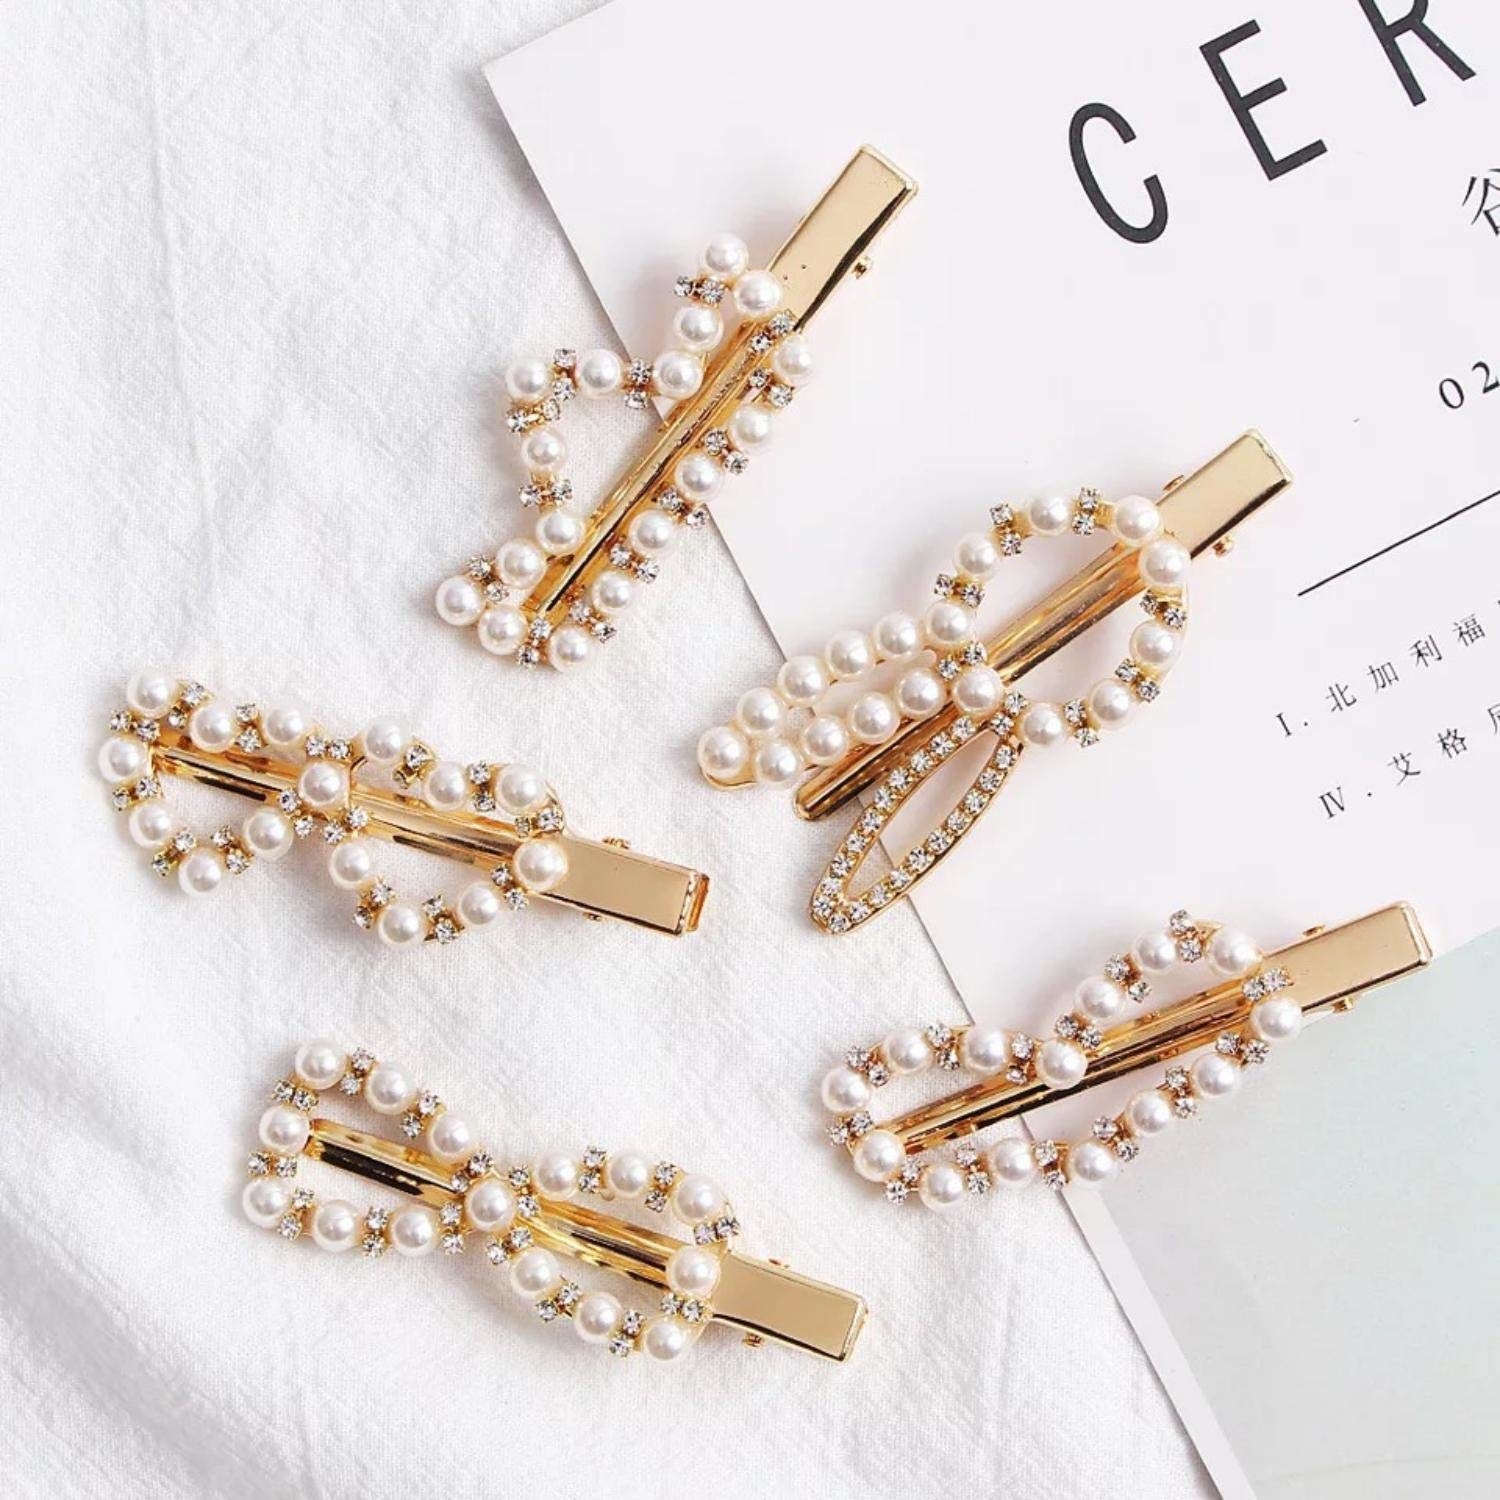 24 Hot Hair Accessories For Every Hair Length Right Now